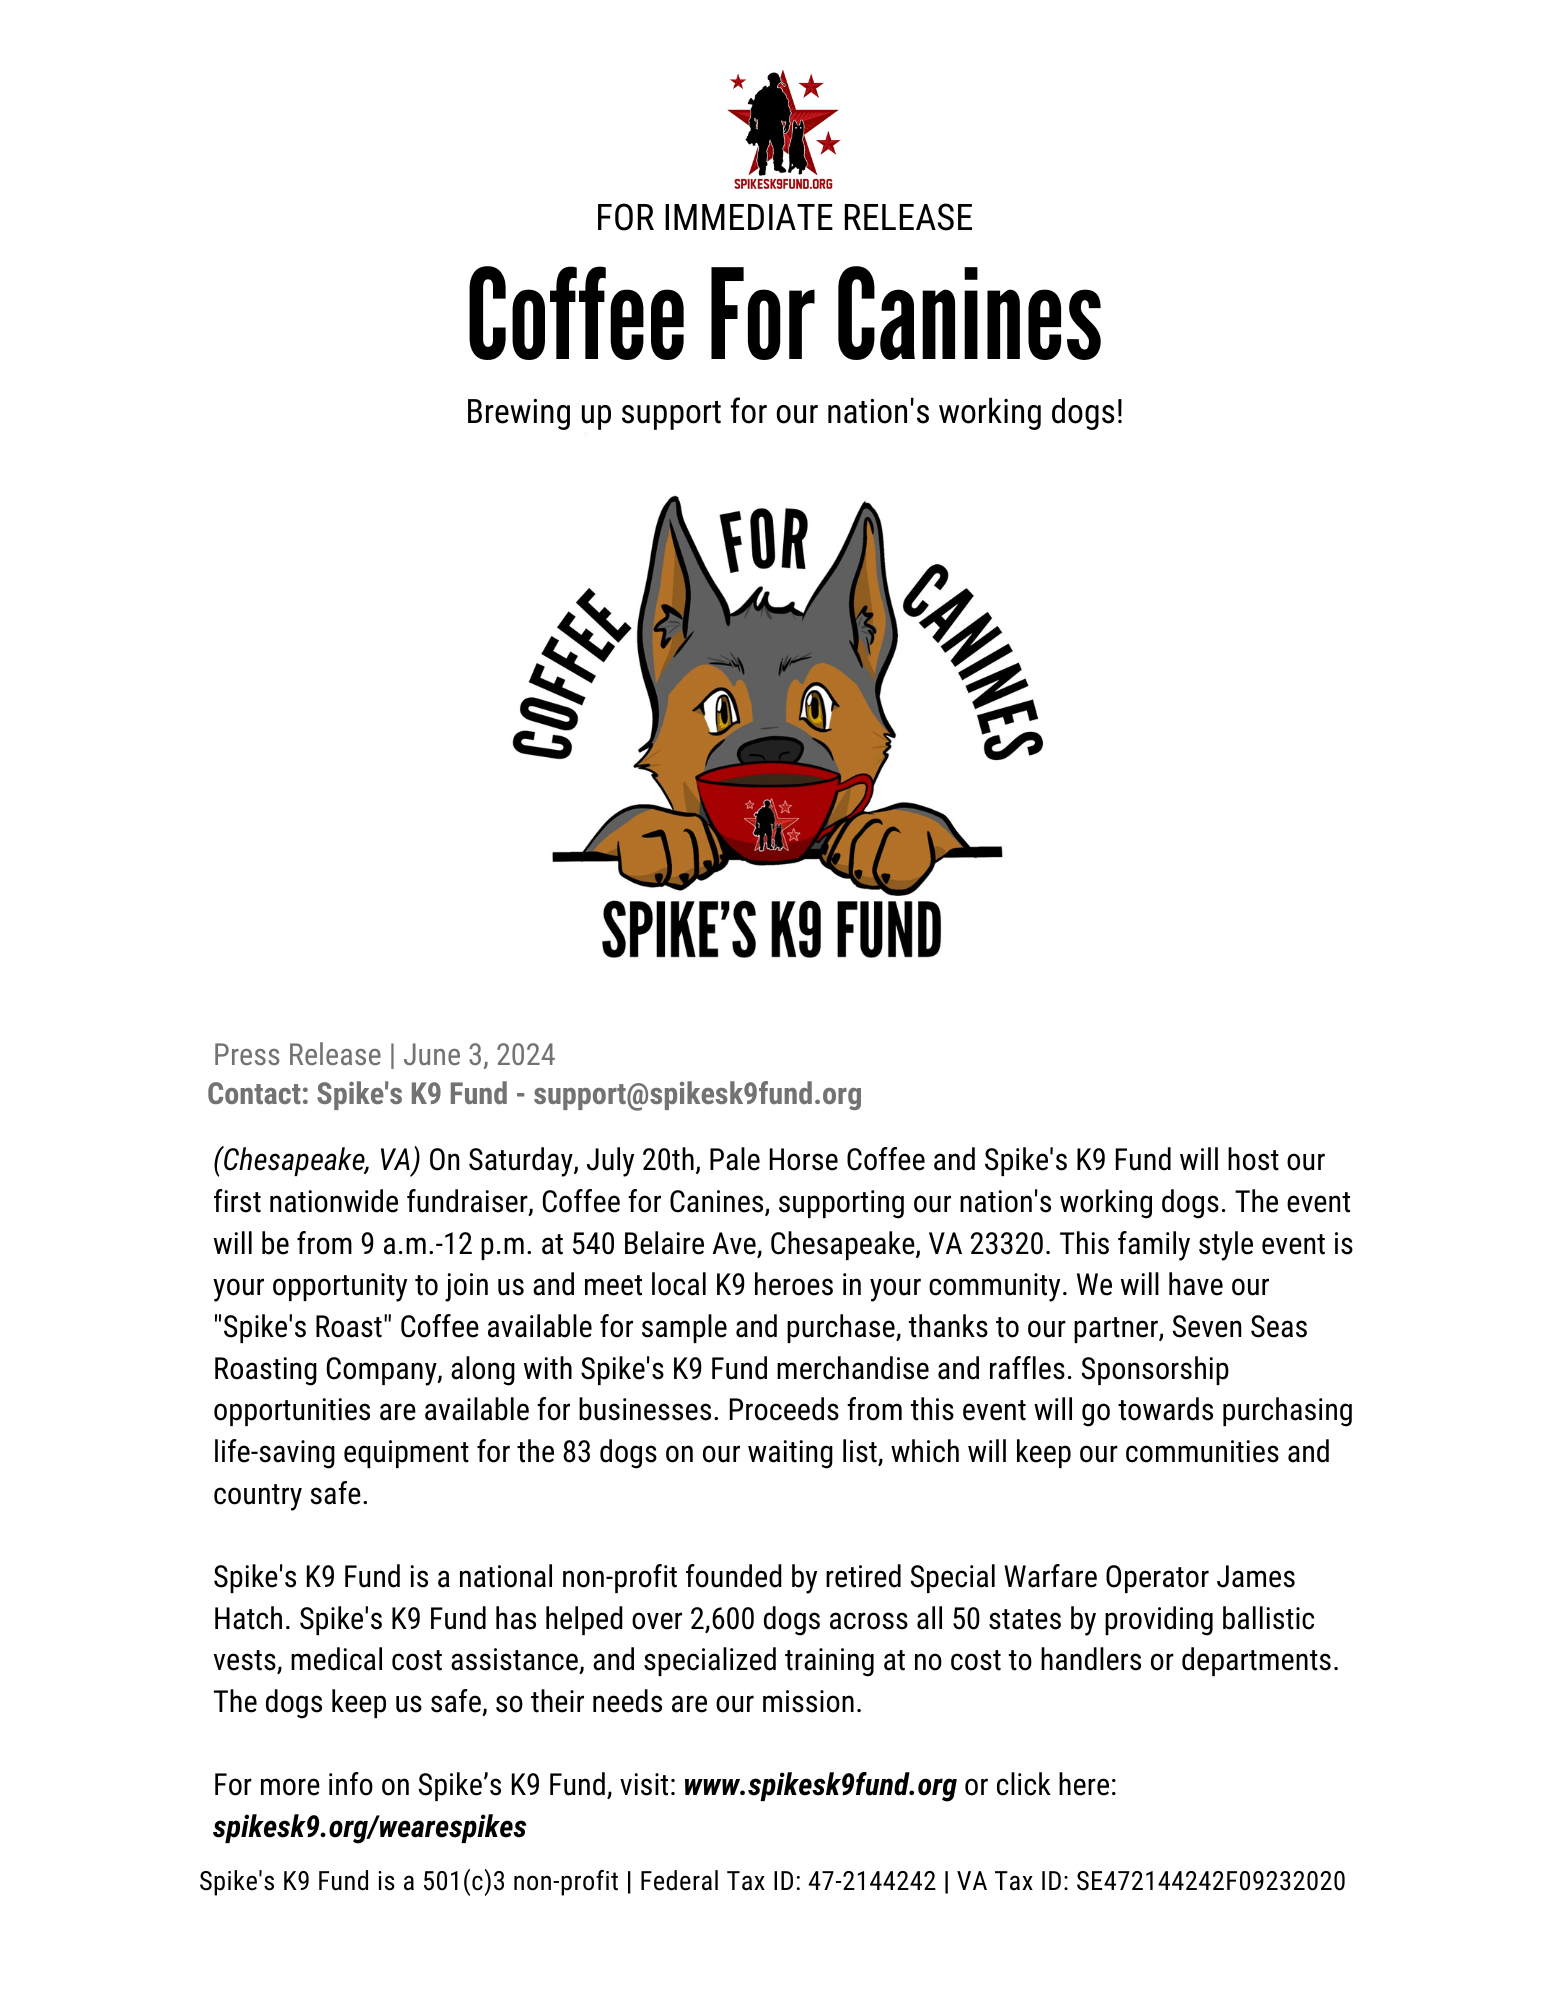 Coffee for Canines